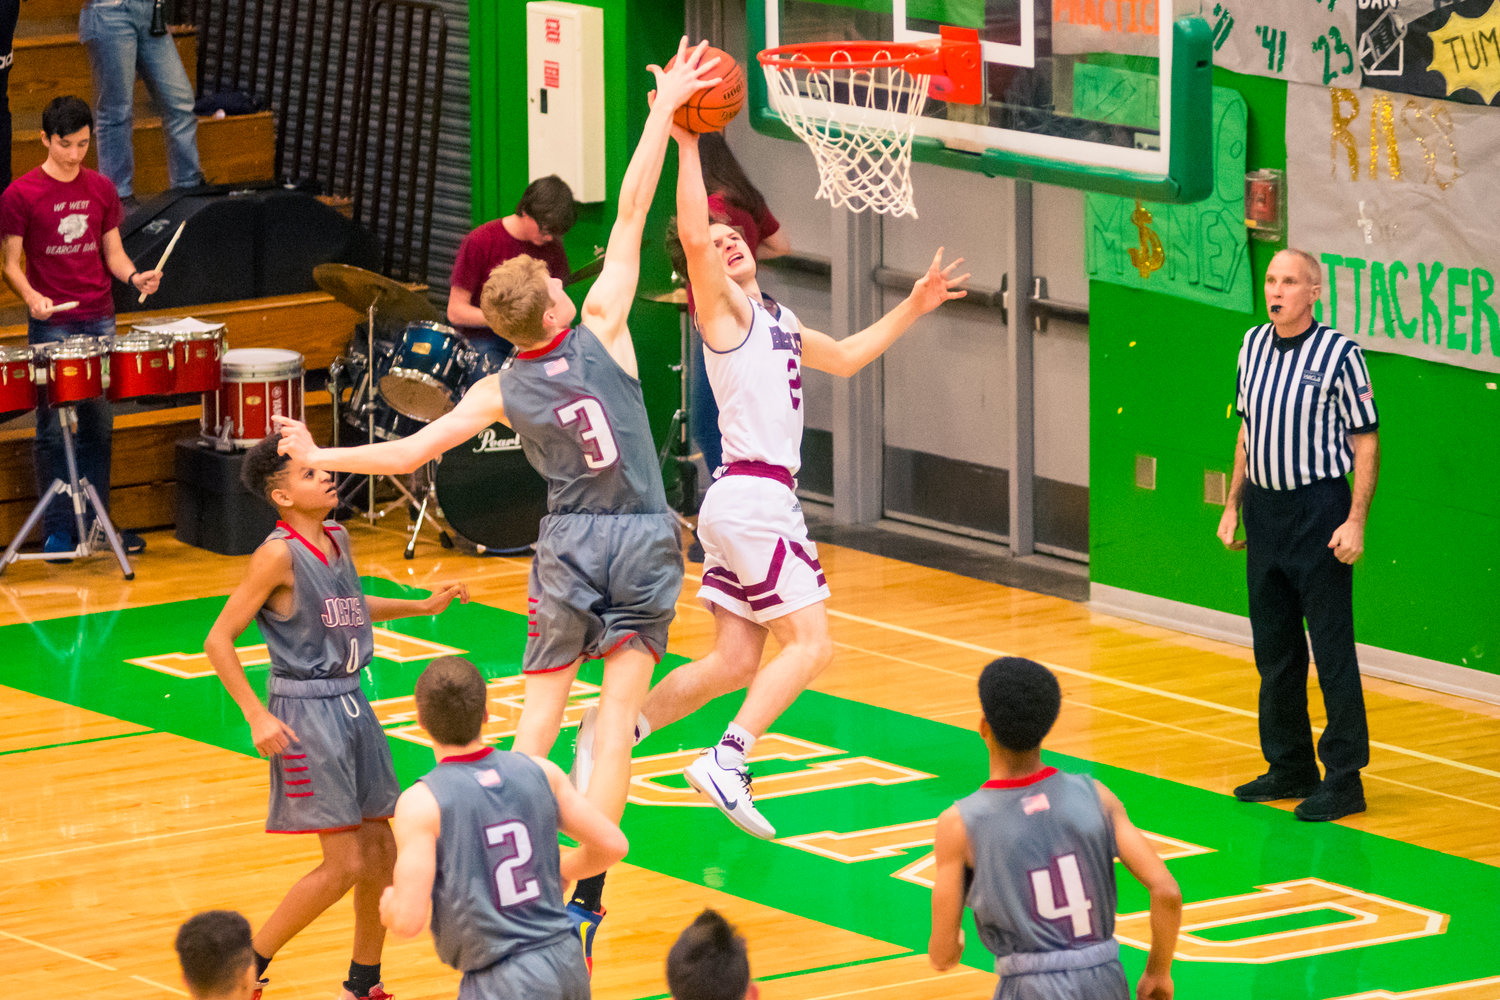 Images from a 2A District boys basketball game between R.A. Long and W.F. West played Thursday night at Tumwater High School.